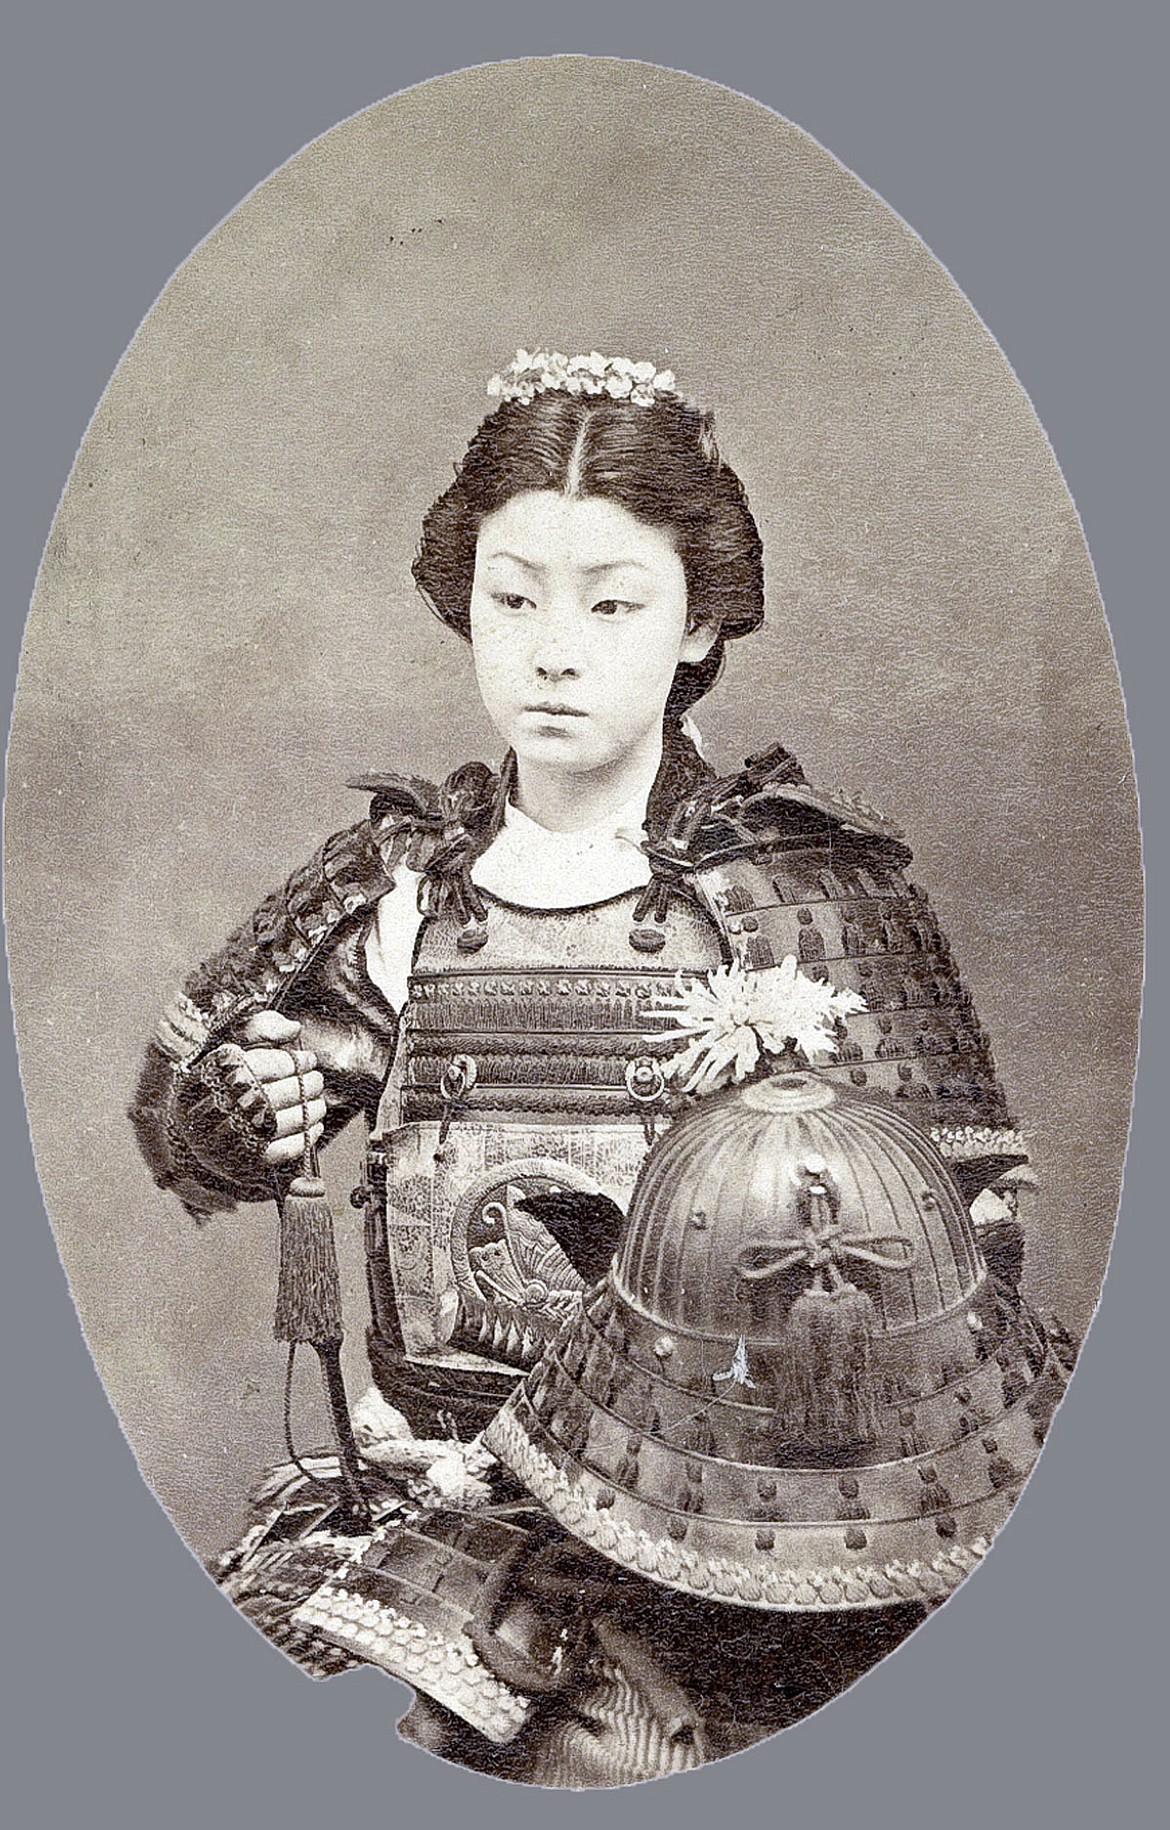 Tomoe Gozen was a 12th century female samurai, a favorite subject in Japanese history, literature and entertainment media.